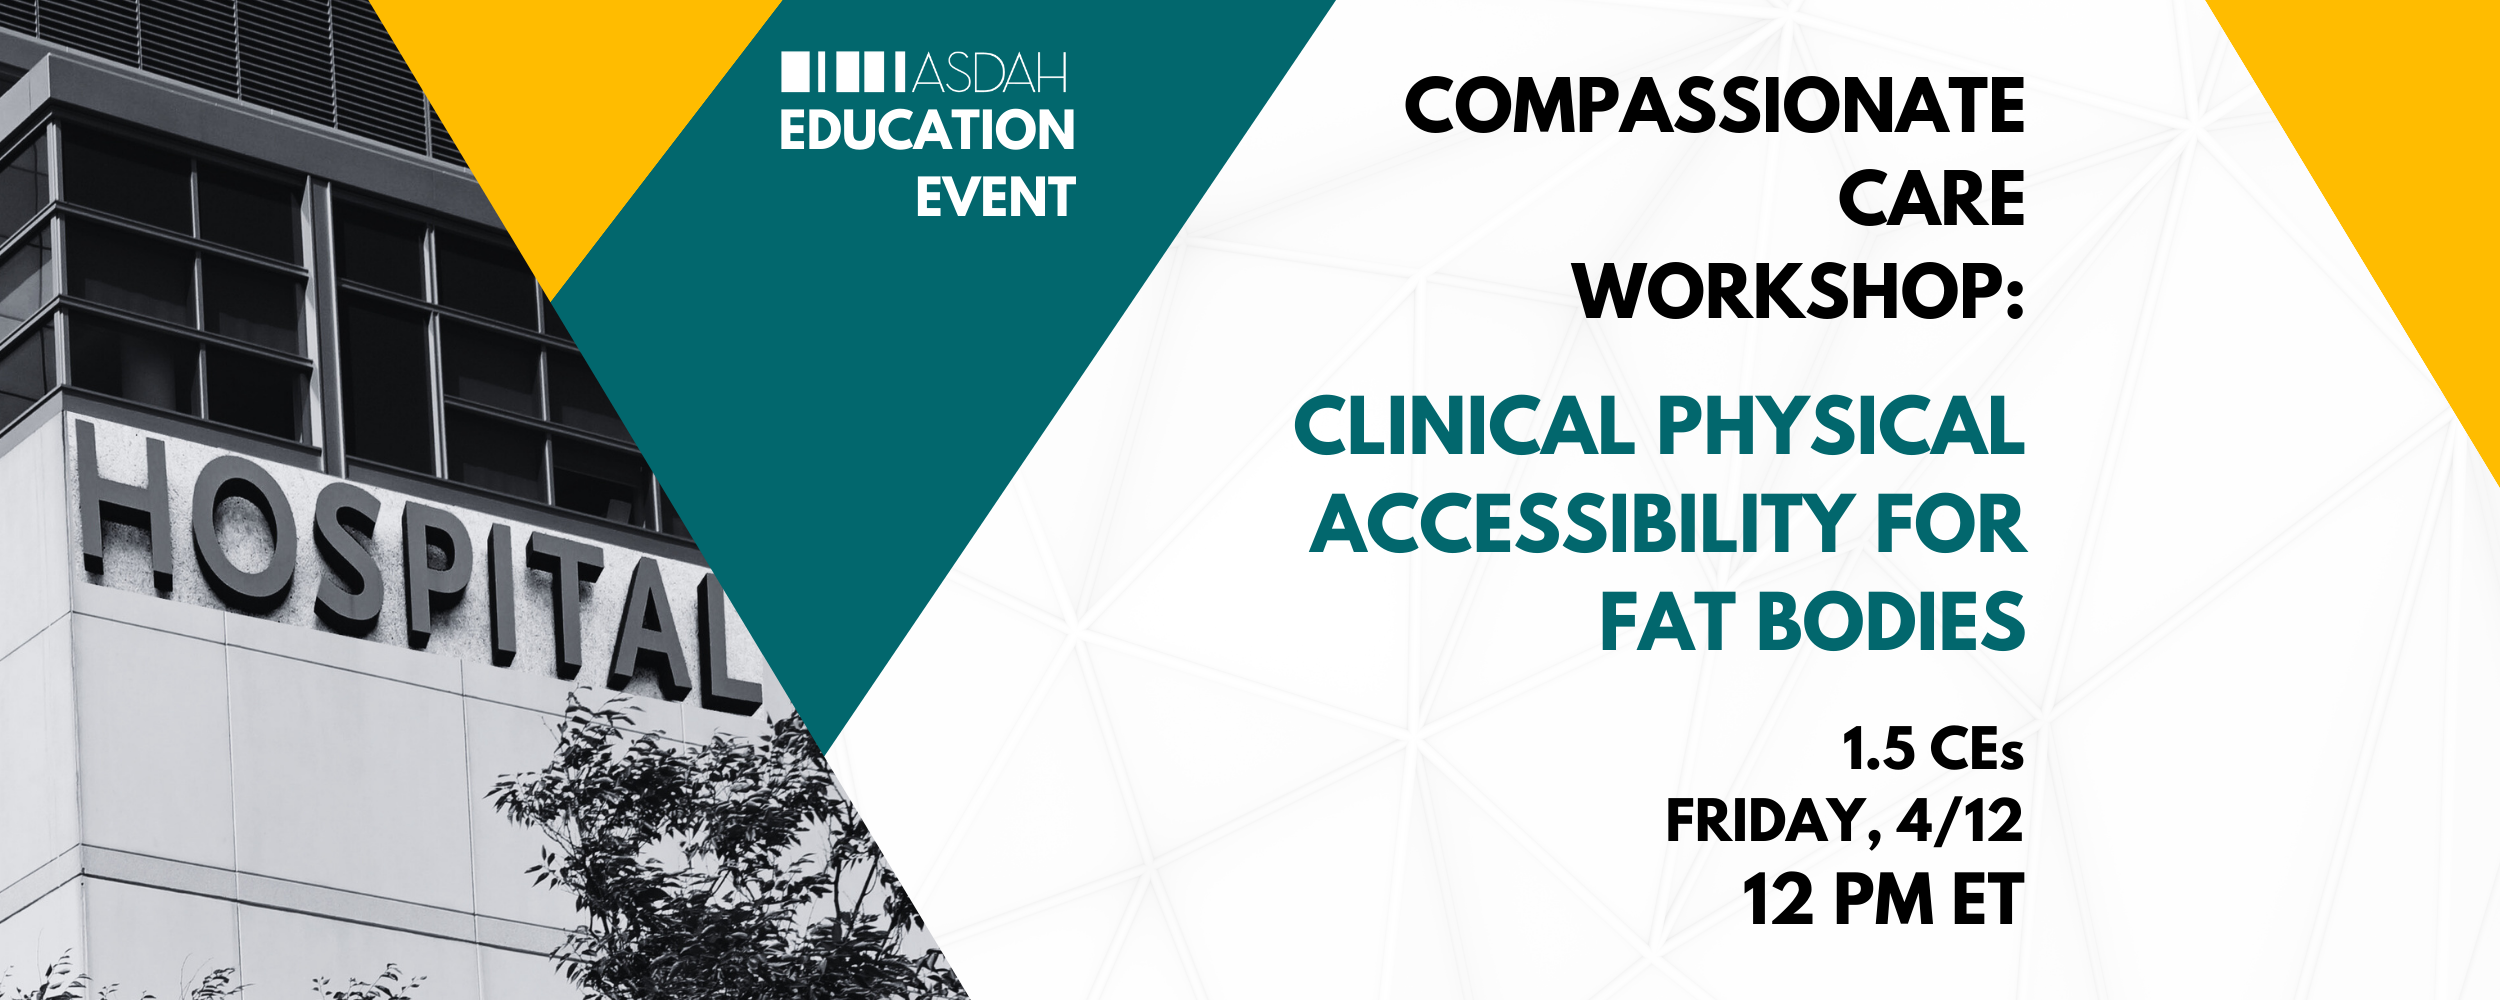 Event header: Image of a hospital, teal, white, and gold stripes in the background. Text reads: Compassionate Care Workshop: Clinical Physical Accessibility for Fat Bodies, 1.5 CEs, Friday, 4/12, 12PM ET